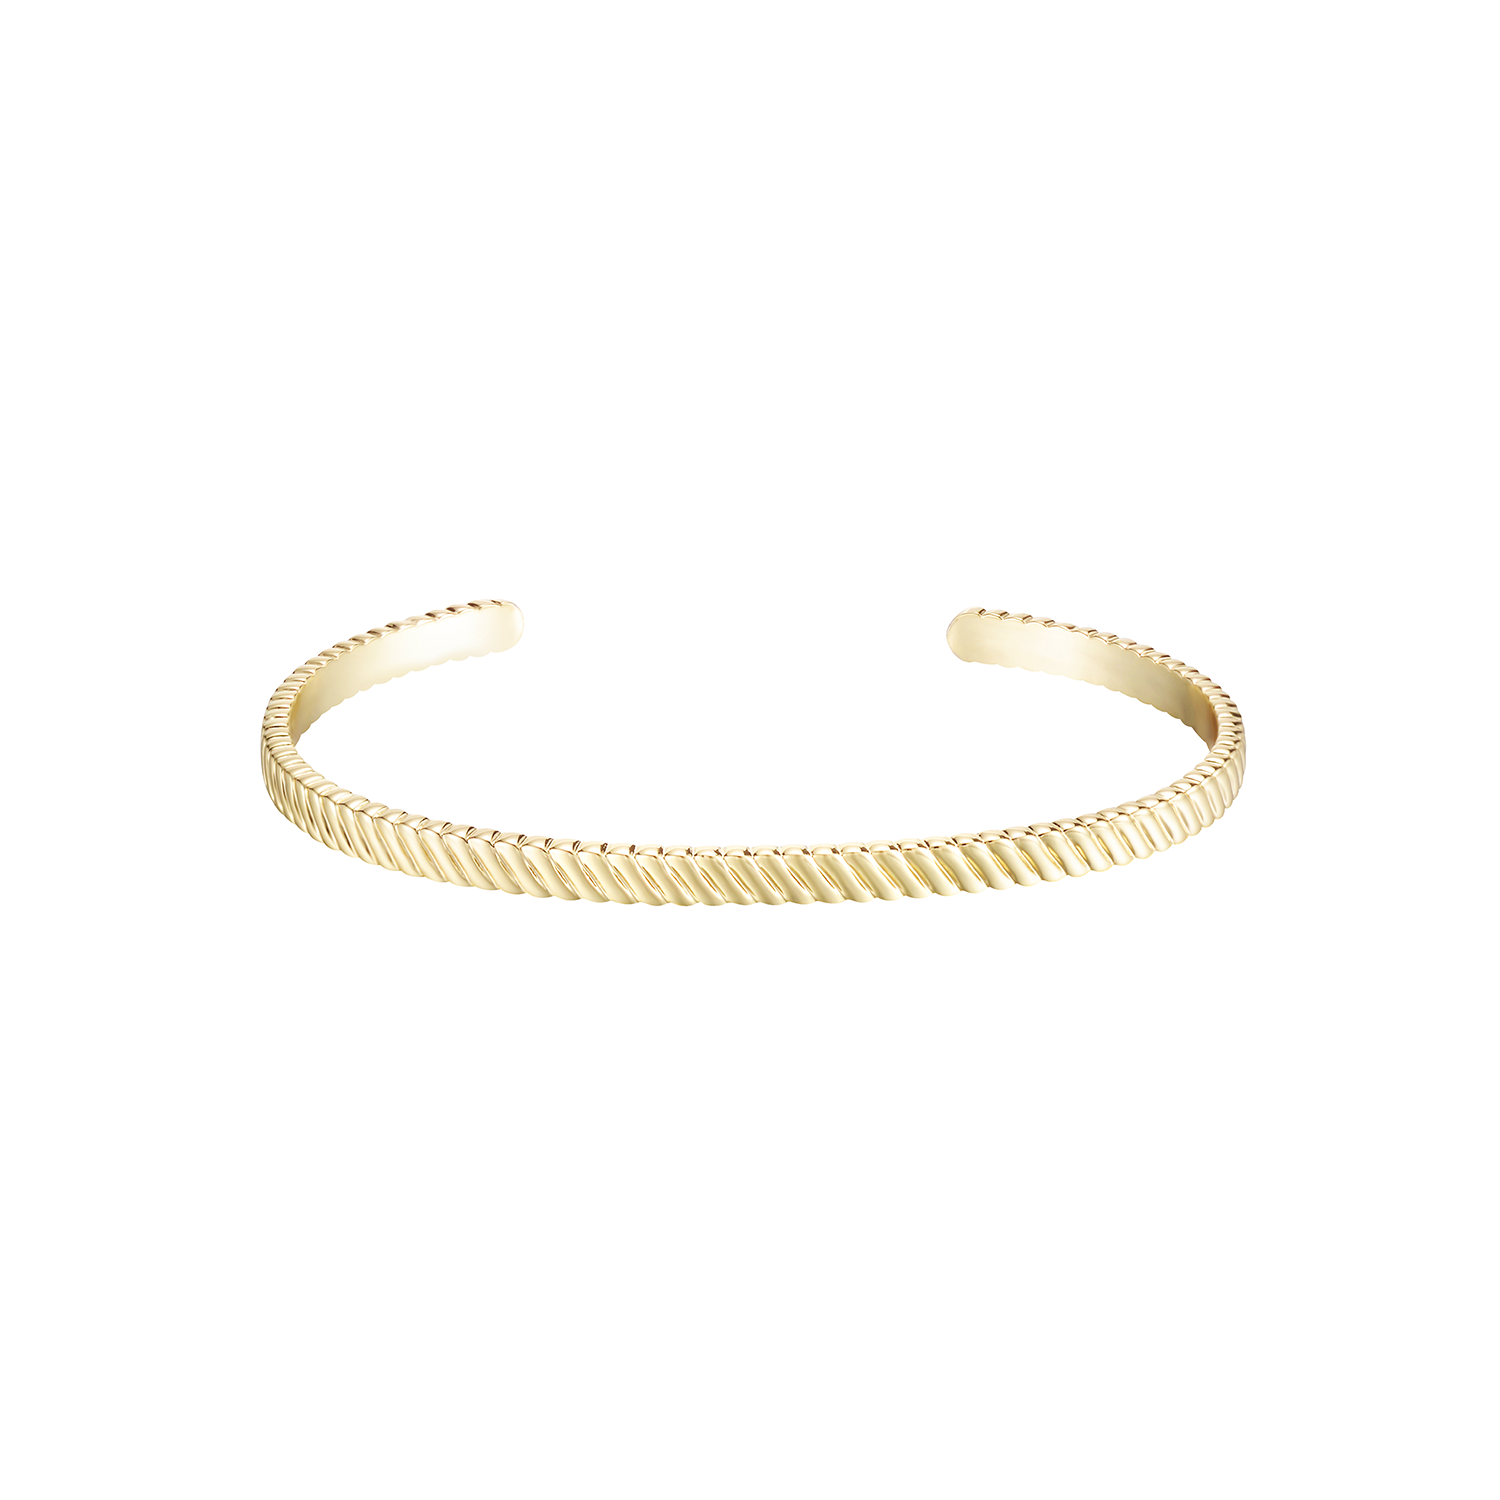 Eclipse Stacking Cuff Bracelet in Gold